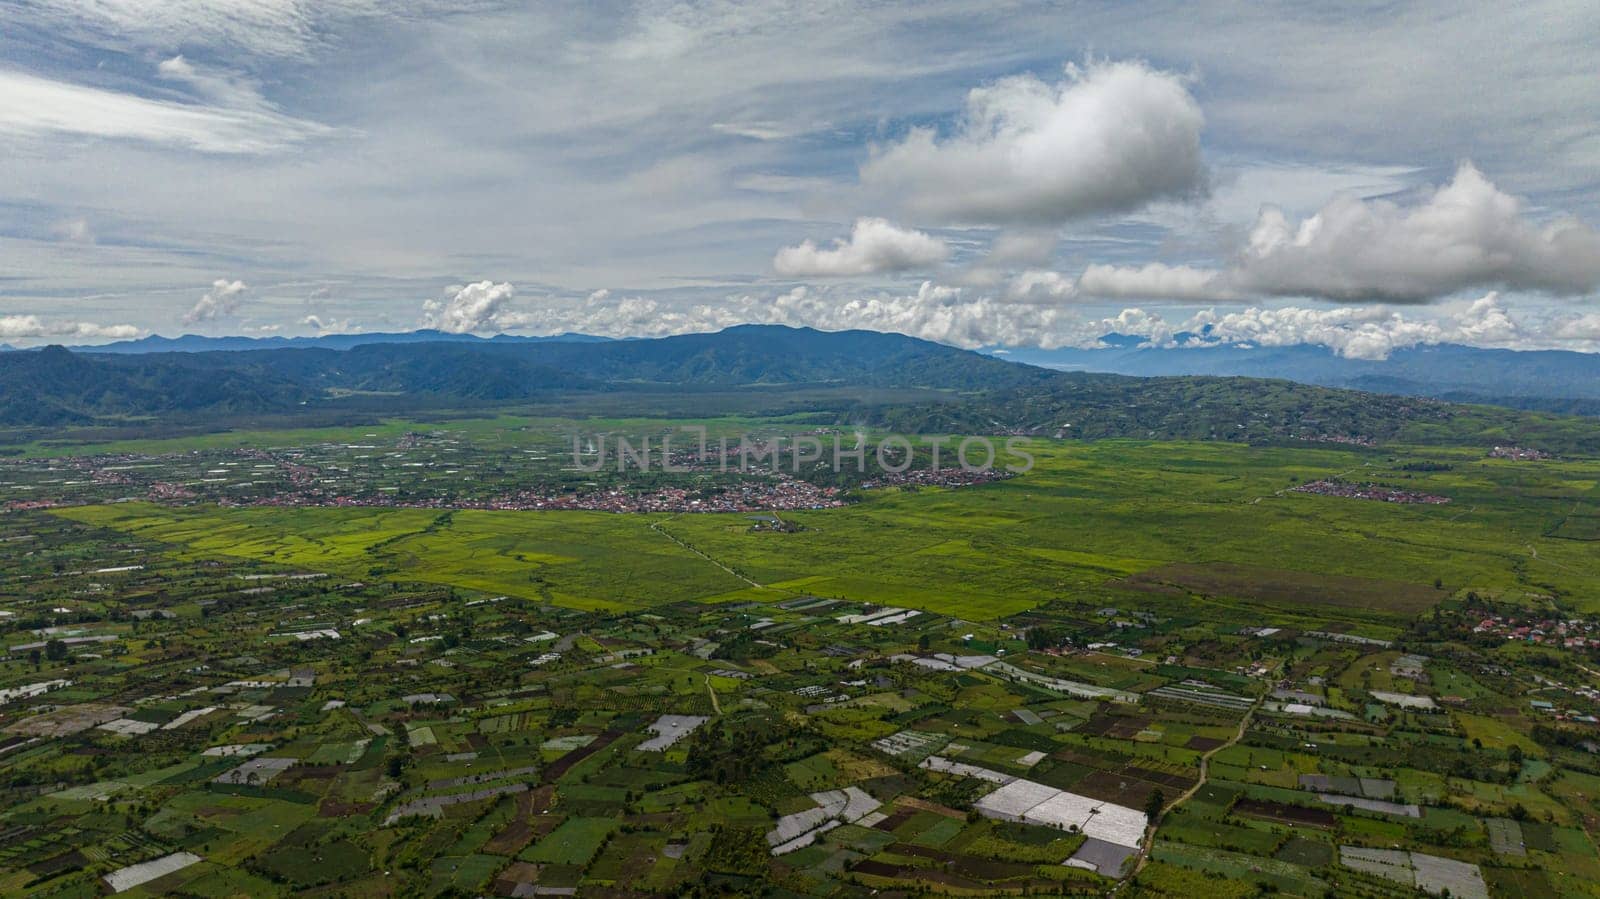 Aerial view of farm and agricultural land with crops in the mountainous area. Kayu Aro, Sumatra, Indonesia.